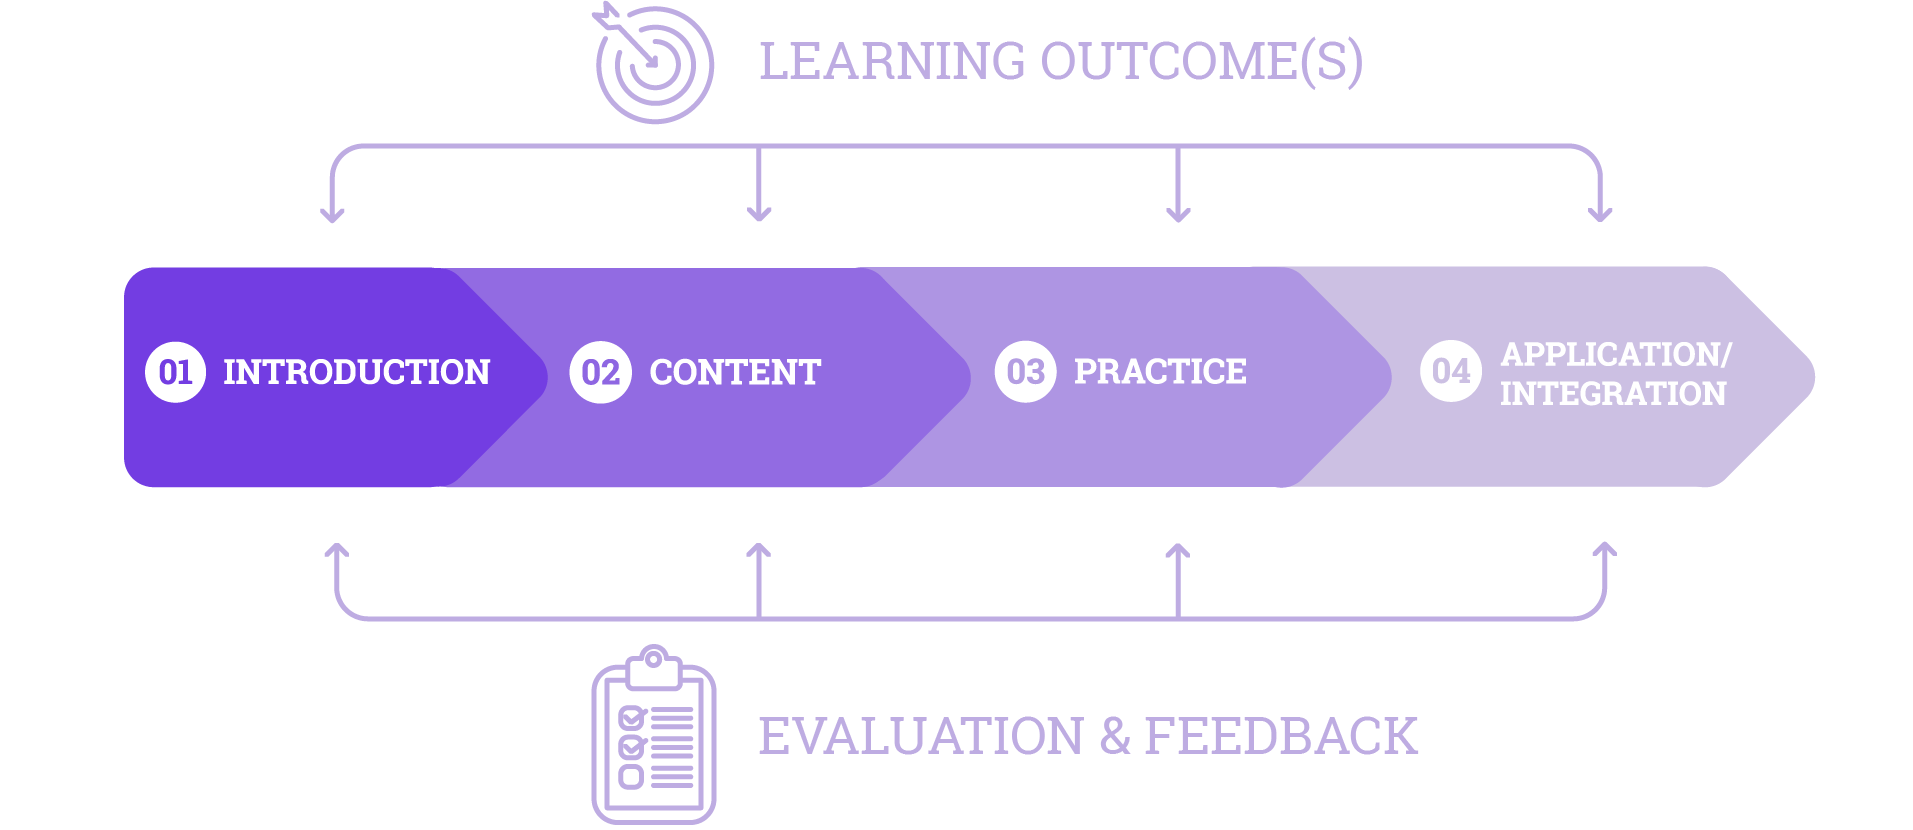 the instructional framework is displayed as four phases: Introduction, Presentation of content, practice and Application/integration. These four phases all have arrows pointing to each one that are labelled: learning outcomes and feedback.